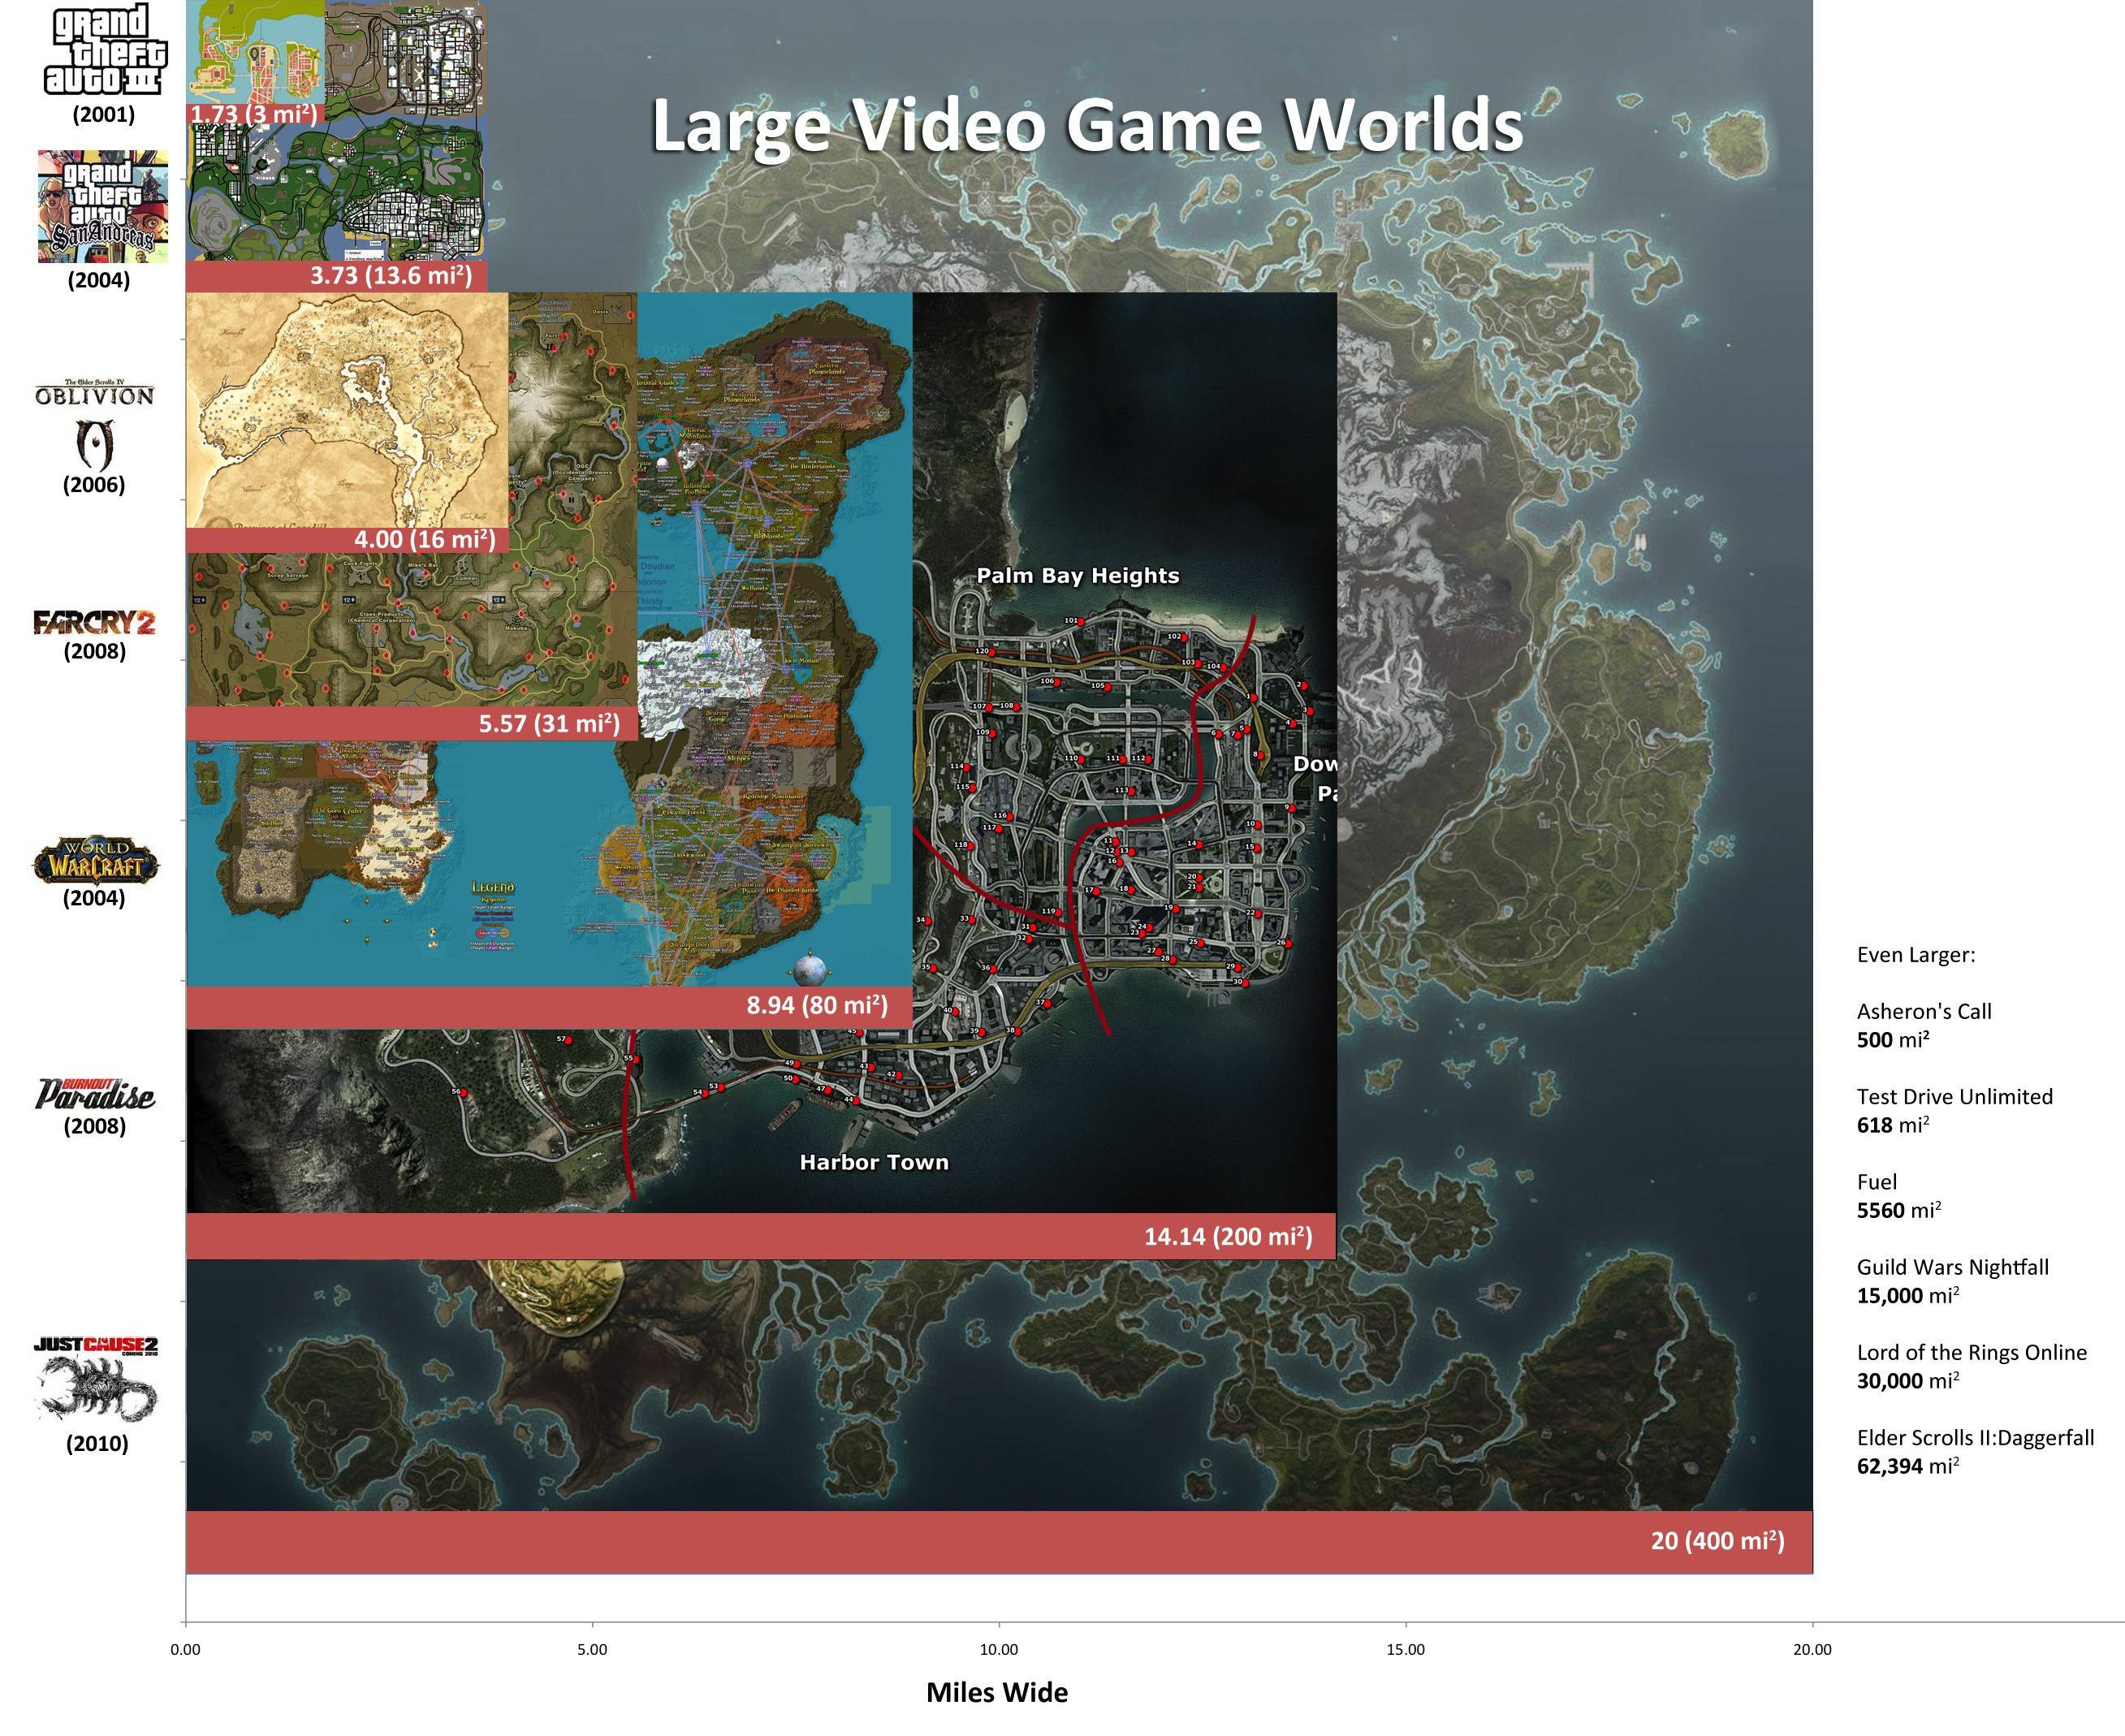 Video Game World Size Comparisons